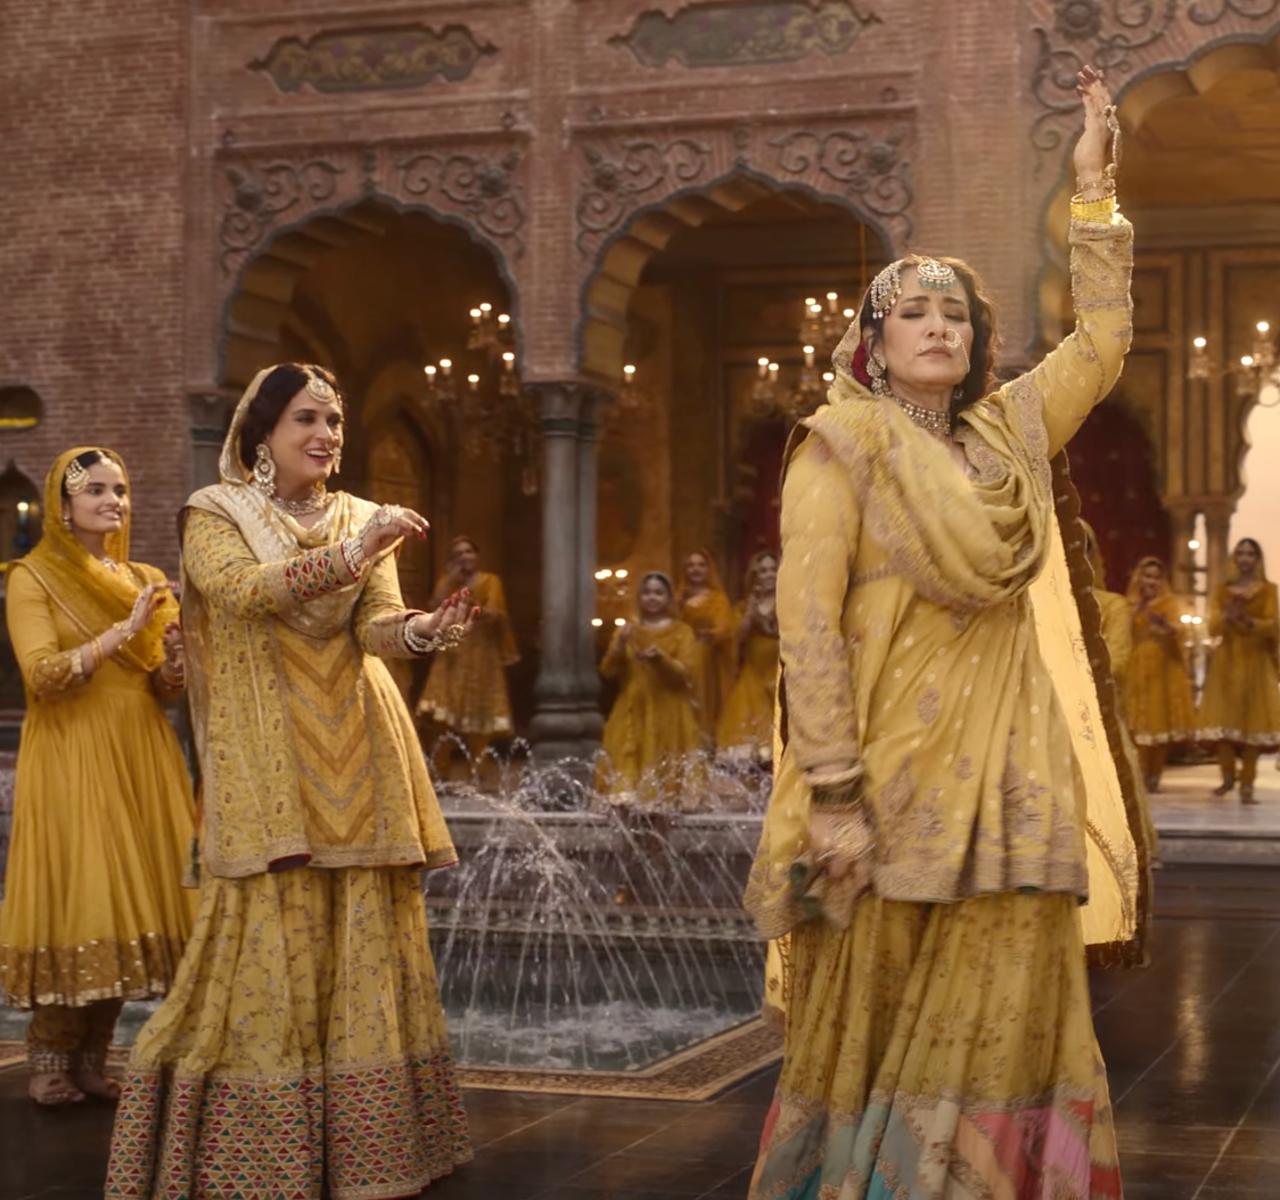 Costumes: Bhansali's keen eye for detail is evident in the breathtaking costumes of 'Sakal Ban'. The leading ladies are dressed in hues of yellow, mustard, gold – similar yet distinct like beautiful pieces of a puzzle. Drawing inspiration from traditional Indian attire, the costumes are a visual spectacle in themselves, adding to the overall opulence of the production.5 Things We Love About Sanjay Leela Bhansali's 'Sakal Ban'